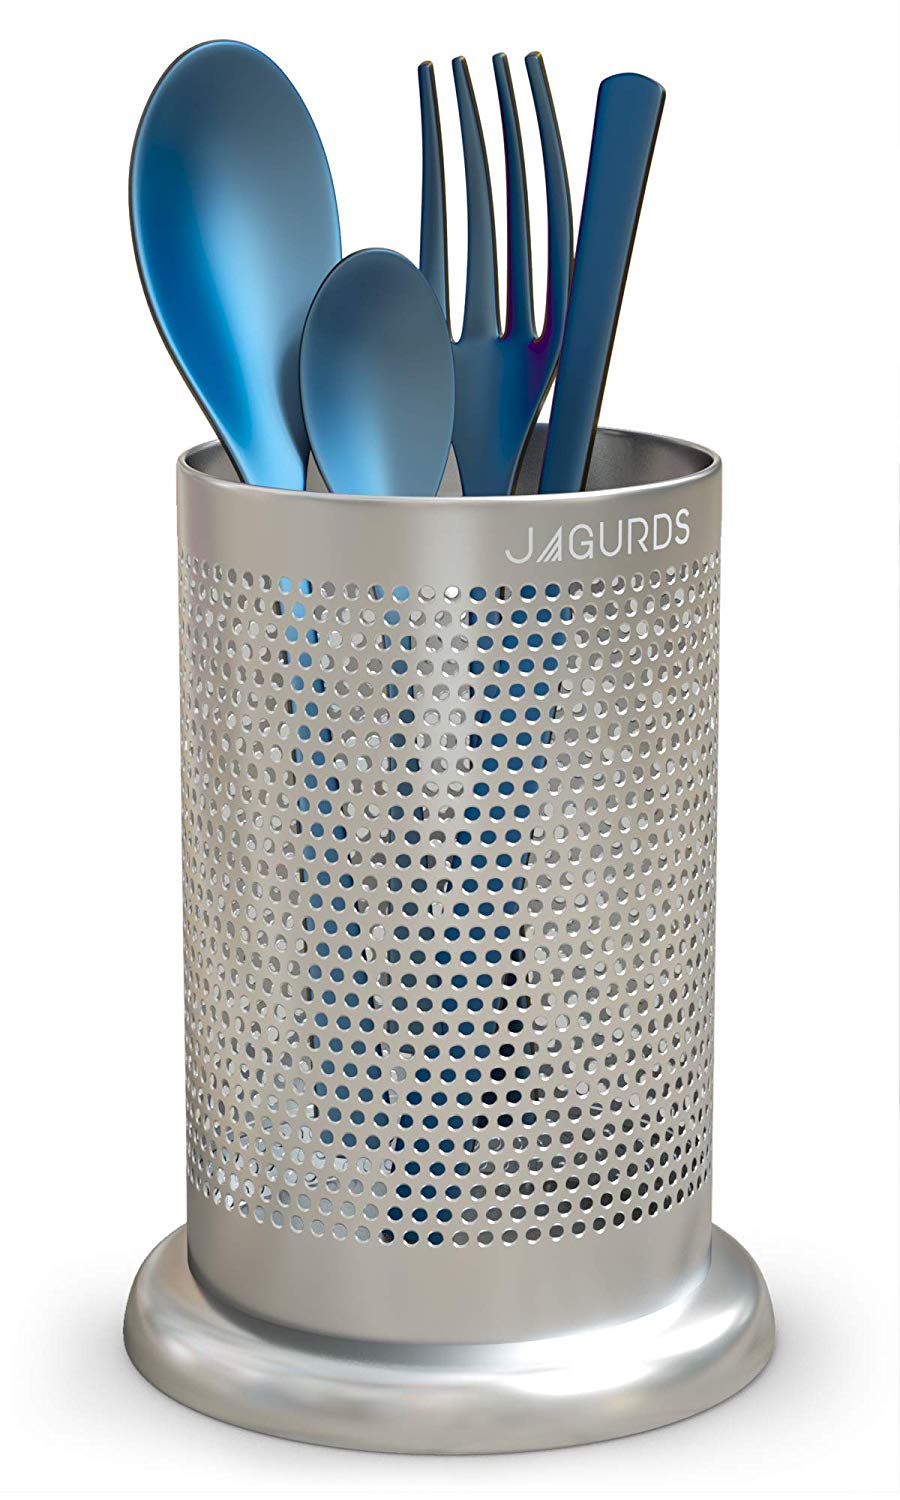 Jagurds Stainless Steel Utensil Holder - Rust-Proof Kitchen Tool Organizer, Perfect Diameter and Height Cutlery Caddy